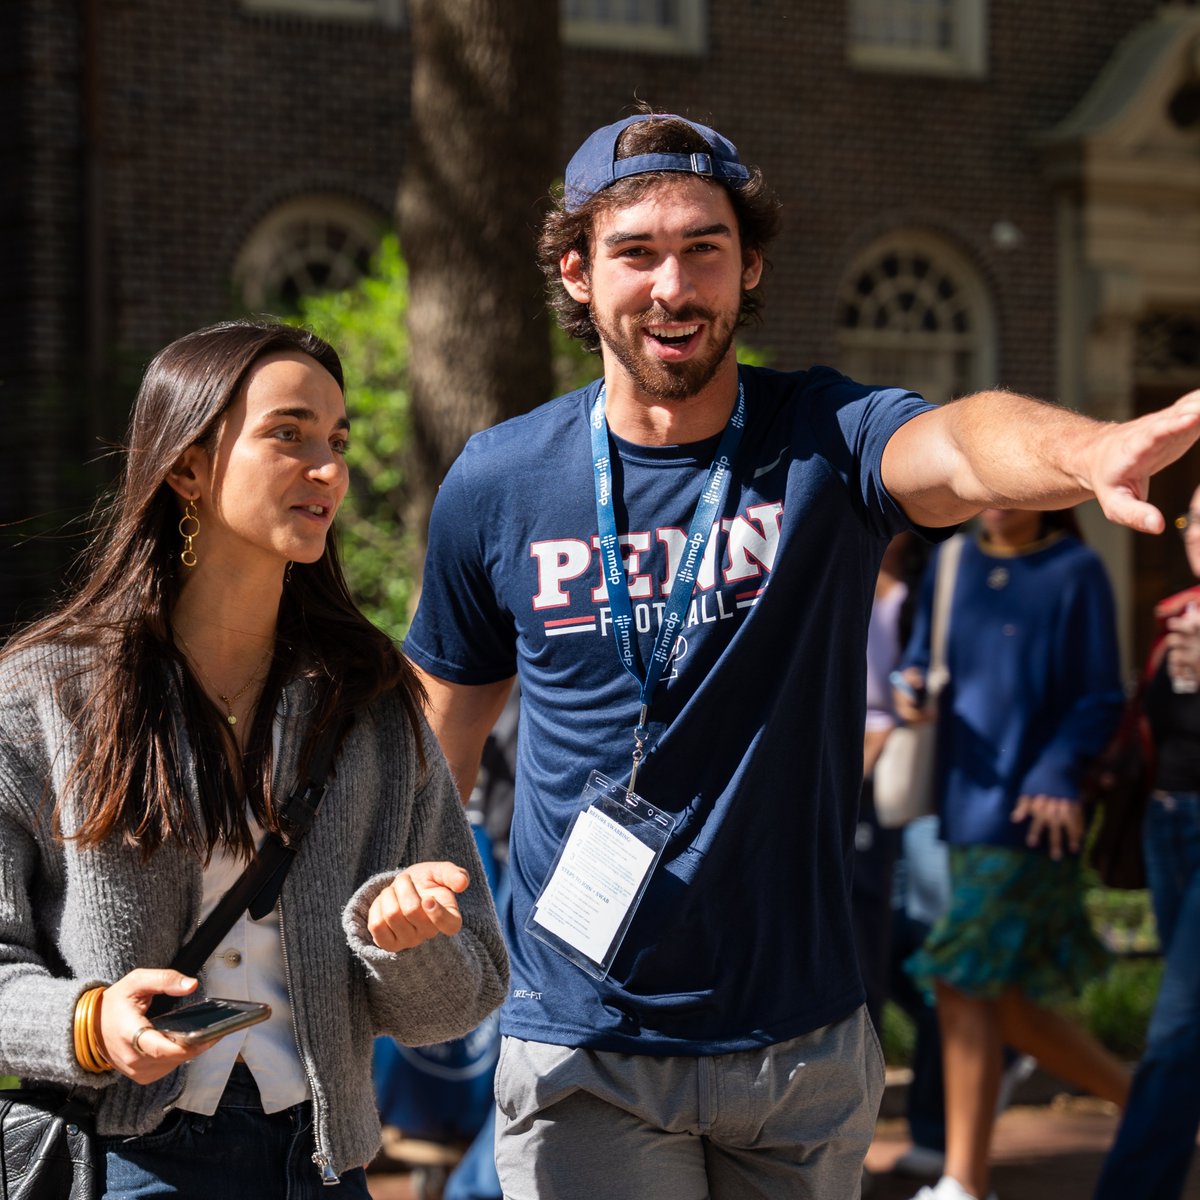 Our 16th annual Get In The Game @nmdp_org Bone Marrow Drive was a smashing success last week. A special shoutout to the @Penn community for showing up and giving back! 🤝 #FightOnPenn x #BEGREAT